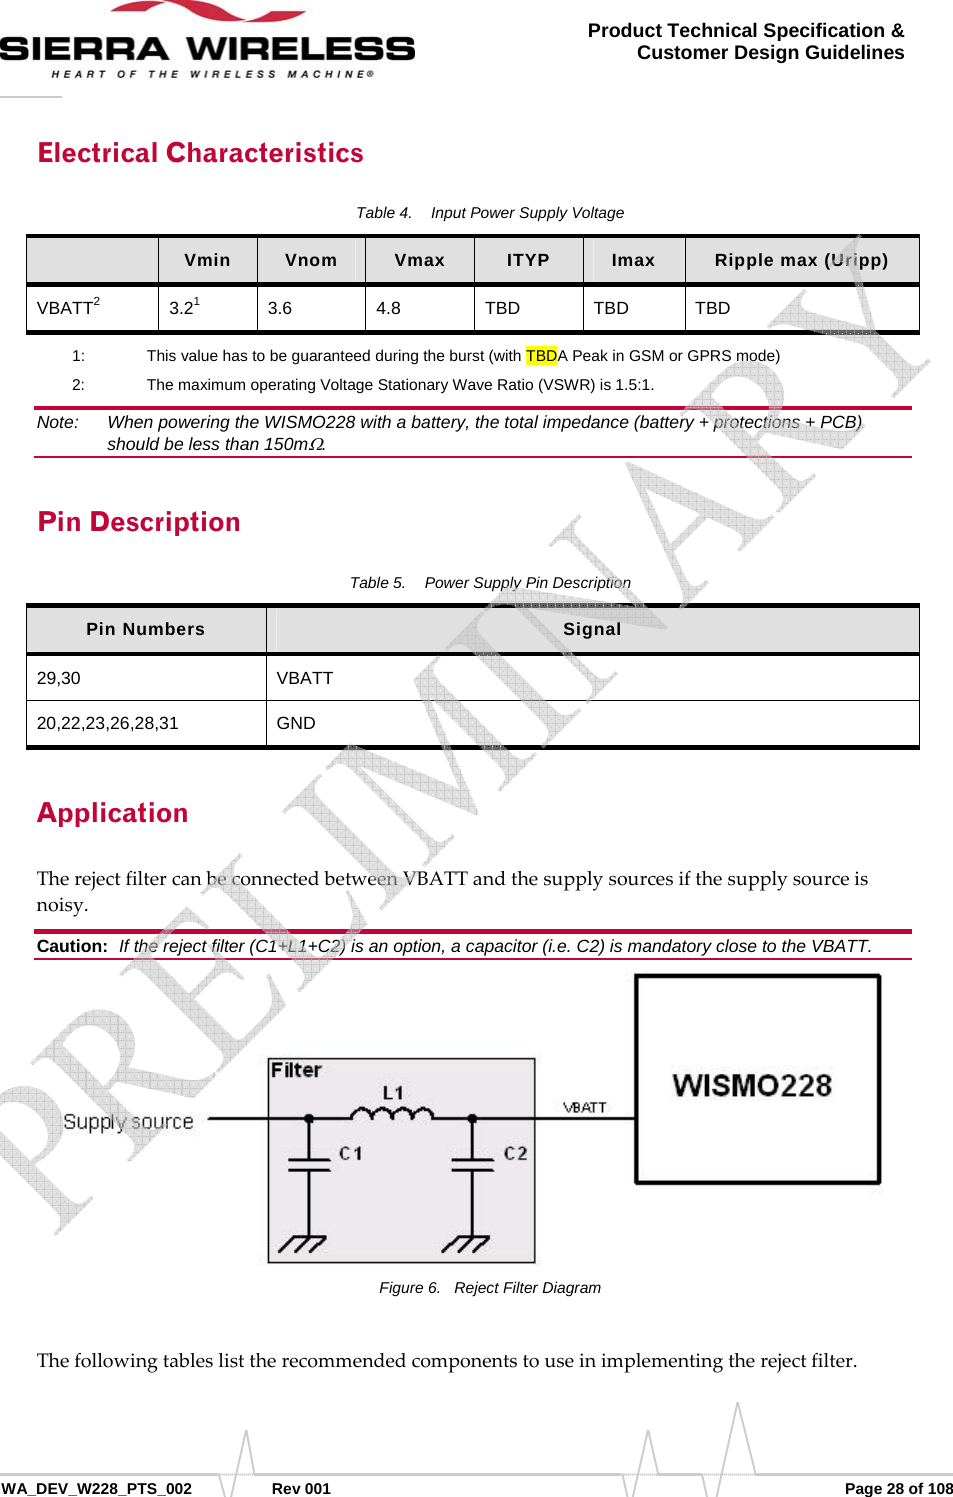      WA_DEV_W228_PTS_002 Rev 001  Page 28 of 108 Product Technical Specification &amp; Customer Design Guidelines Electrical Characteristics Table 4.  Input Power Supply Voltage  Vmin  Vnom  Vmax  ITYP  Imax  Ripple max (Uripp) VBATT2 3.21 3.6 4.8 TBD TBD TBD 1:    This value has to be guaranteed during the burst (with TBDA Peak in GSM or GPRS mode) 2:   The maximum operating Voltage Stationary Wave Ratio (VSWR) is 1.5:1. Note:   When powering the WISMO228 with a battery, the total impedance (battery + protections + PCB) should be less than 150mΩ. Pin Description Table 5.  Power Supply Pin Description Pin Numbers  Signal 29,30 VBATT 20,22,23,26,28,31 GND Application TherejectfiltercanbeconnectedbetweenVBATTandthesupplysourcesifthesupplysourceisnoisy.Caution:  If the reject filter (C1+L1+C2) is an option, a capacitor (i.e. C2) is mandatory close to the VBATT. Figure 6.  Reject Filter Diagram Thefollowingtableslisttherecommendedcomponentstouseinimplementingtherejectfilter.   